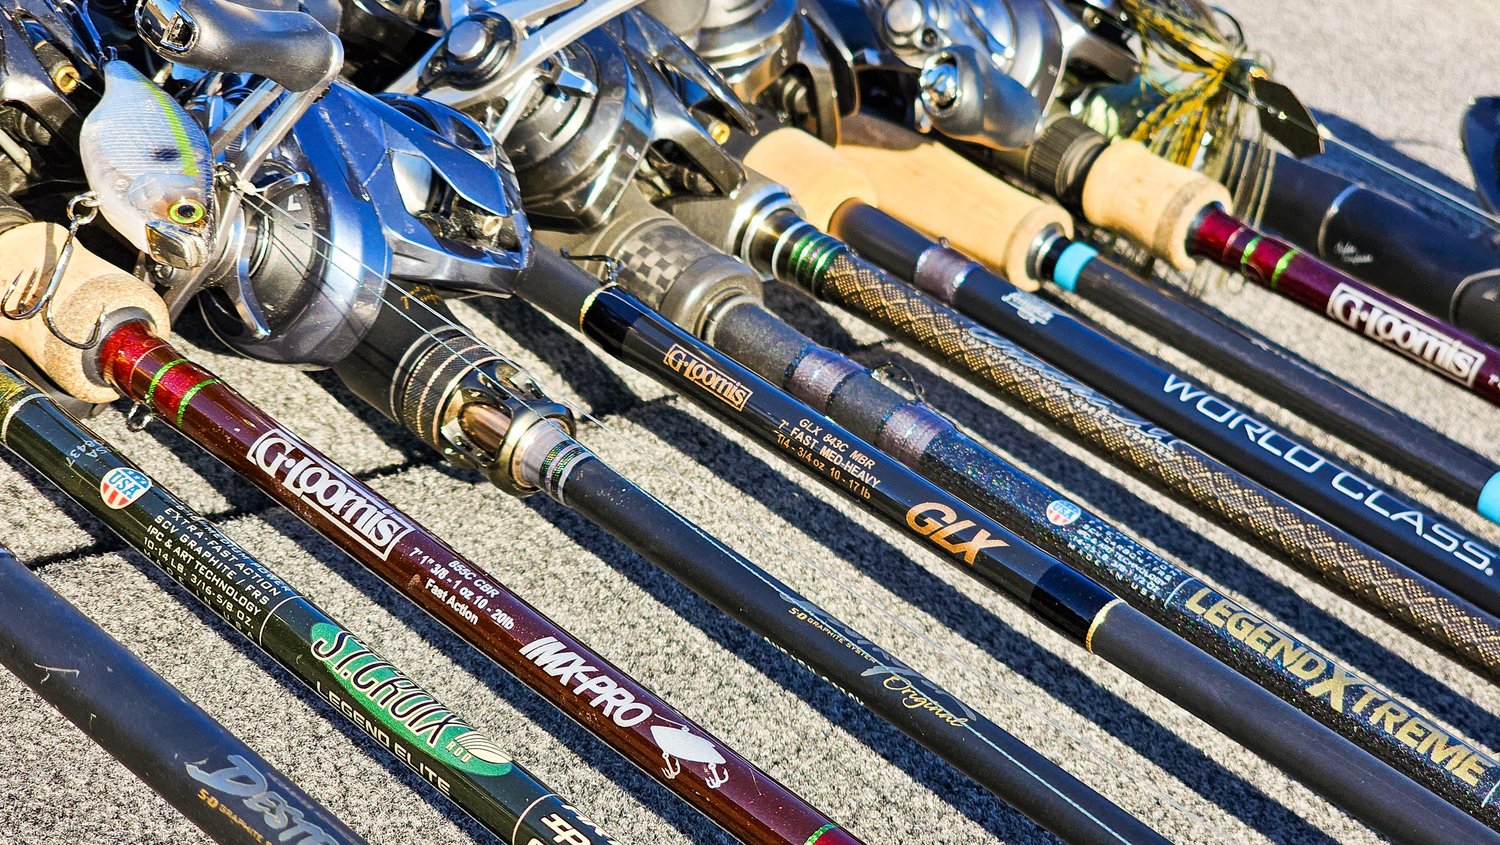 SPRING BUYER'S GUIDE: BEST HIGH END RODS AND REELS FOR BASS